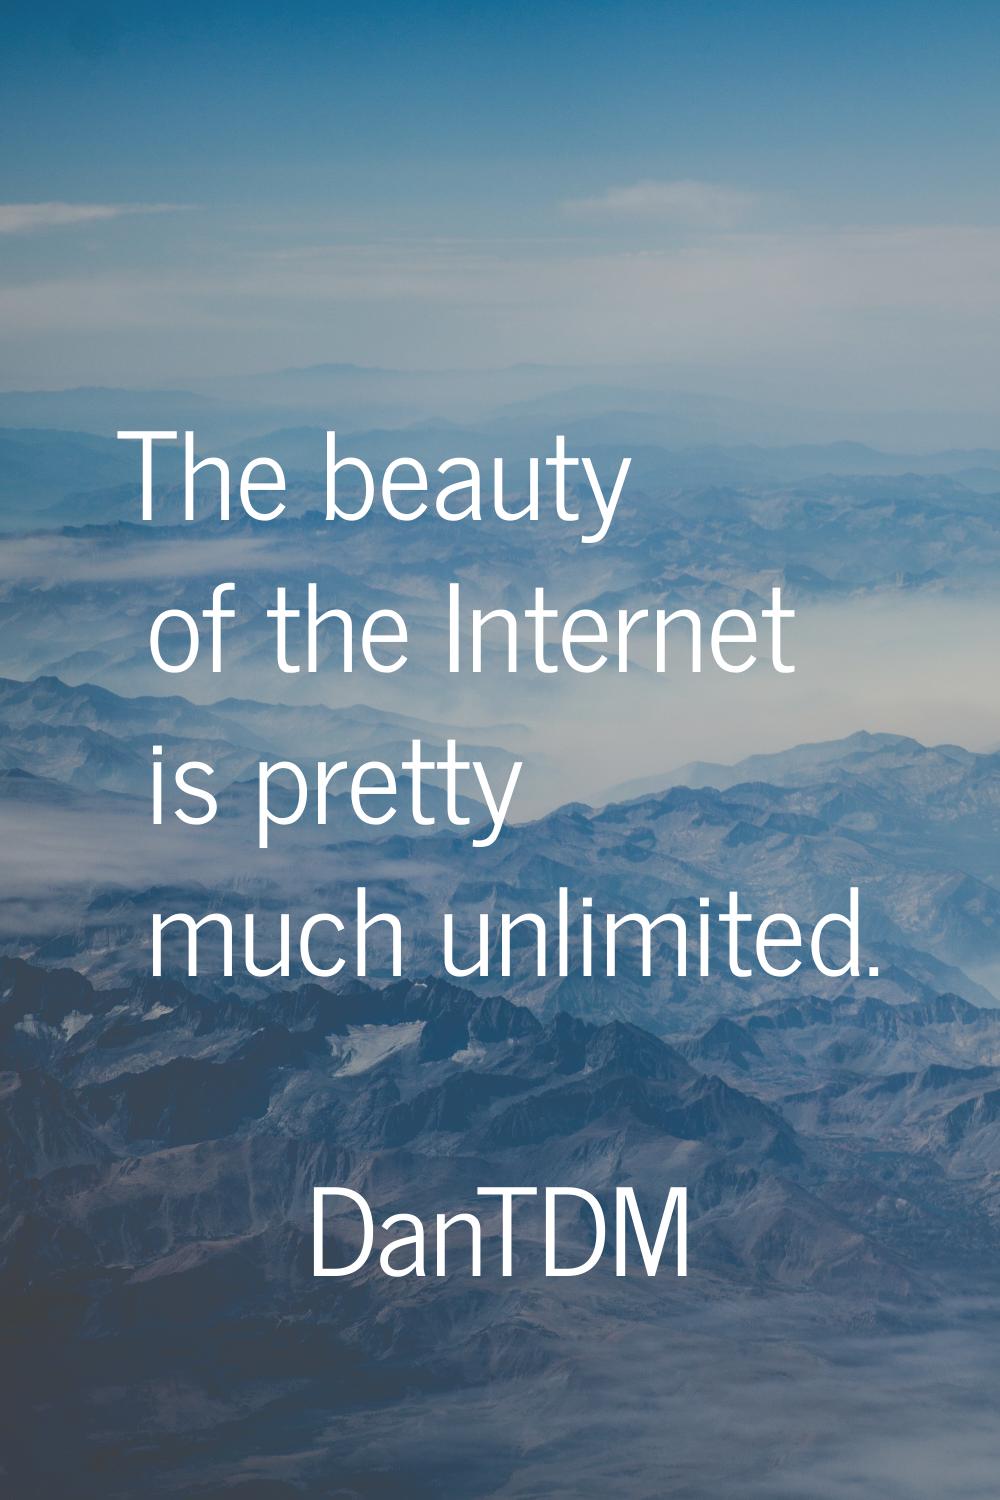 The beauty of the Internet is pretty much unlimited.